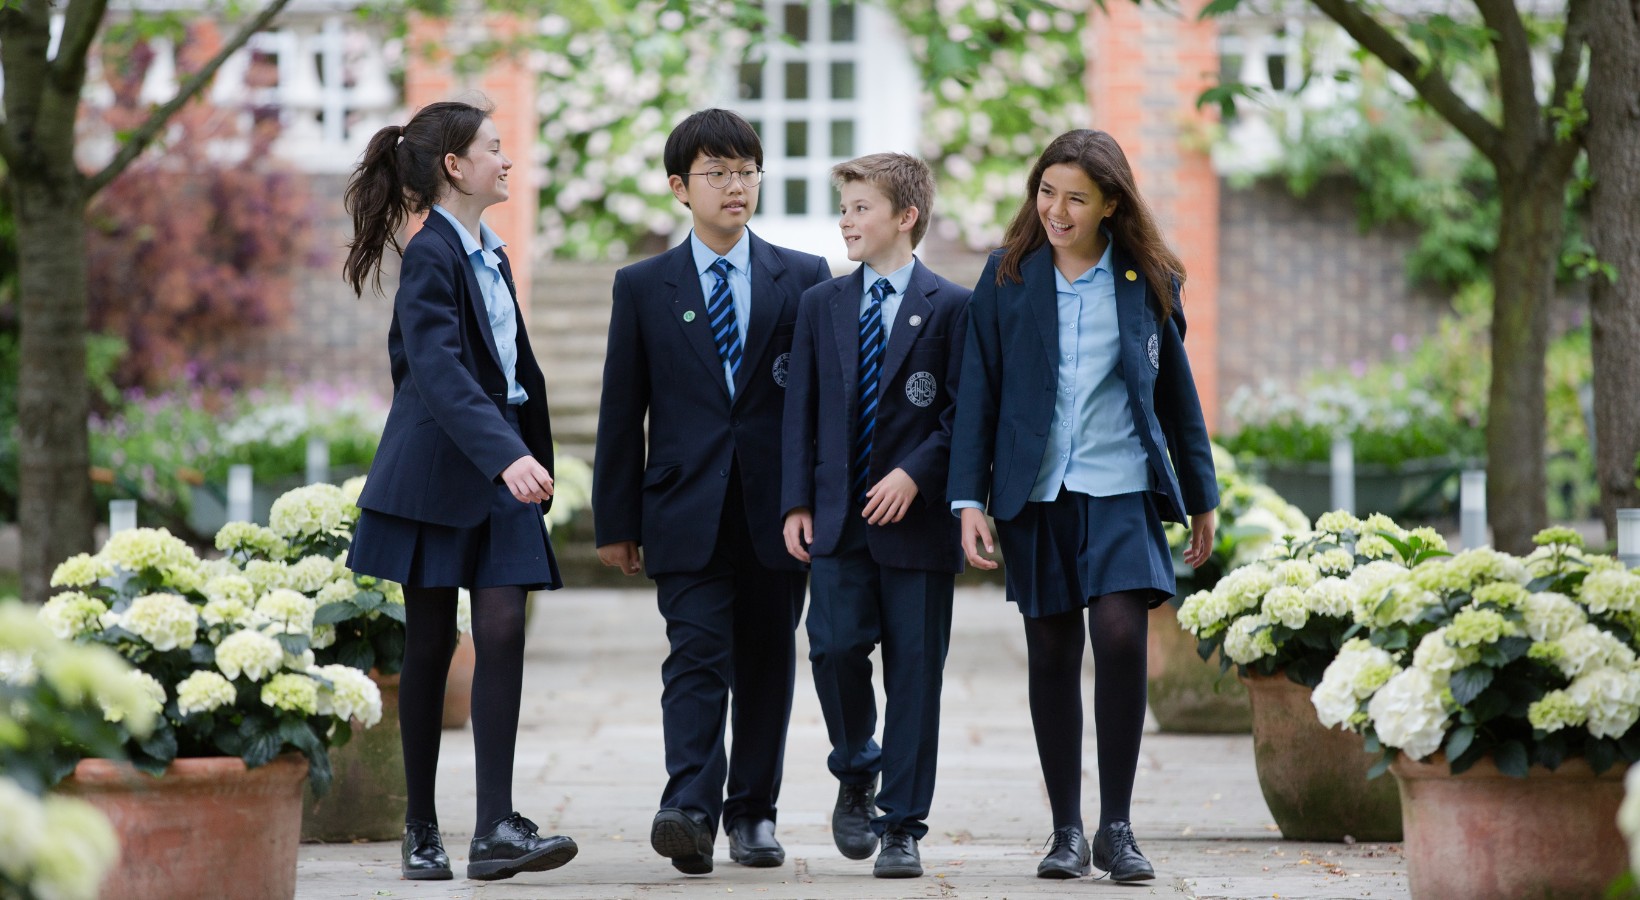 Senior pupils are smiling while walking through the beautiful campus of Ibstock Place School